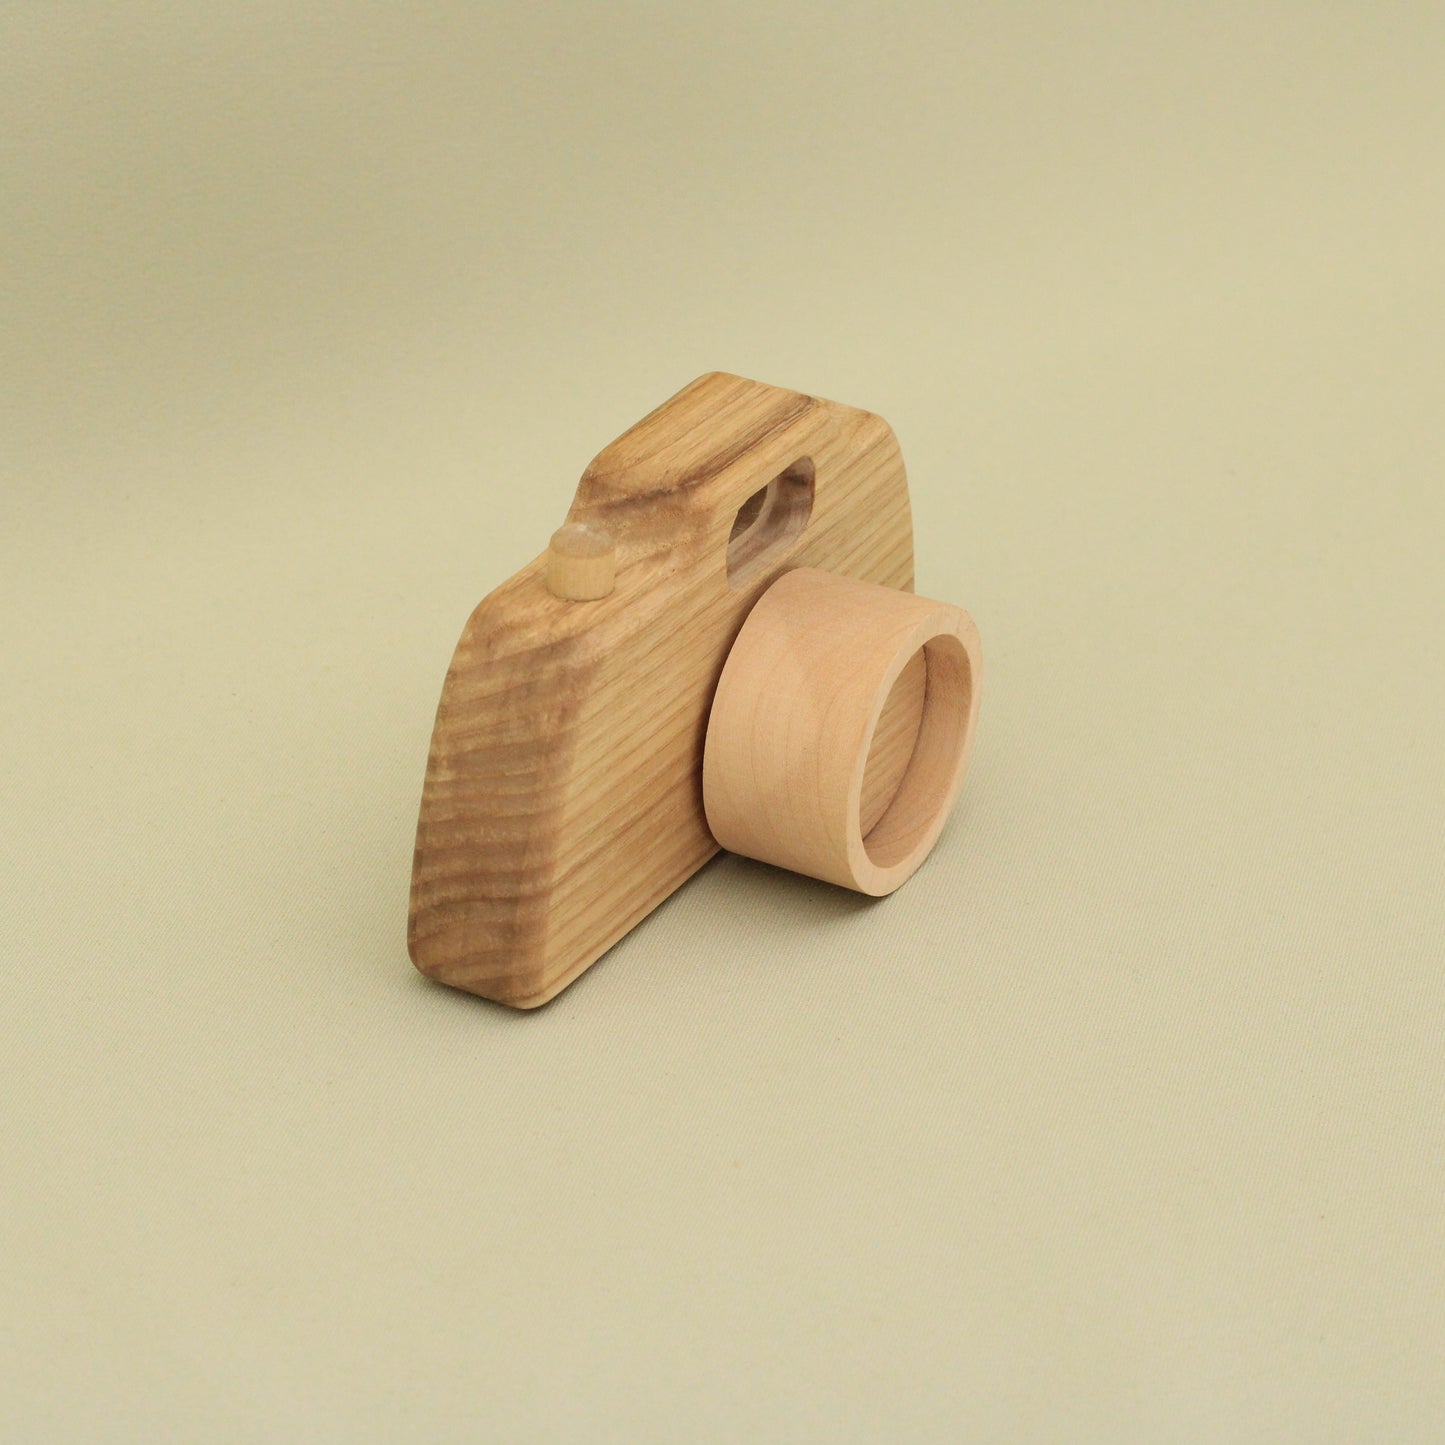 Lotes Toys Wooden Camera III